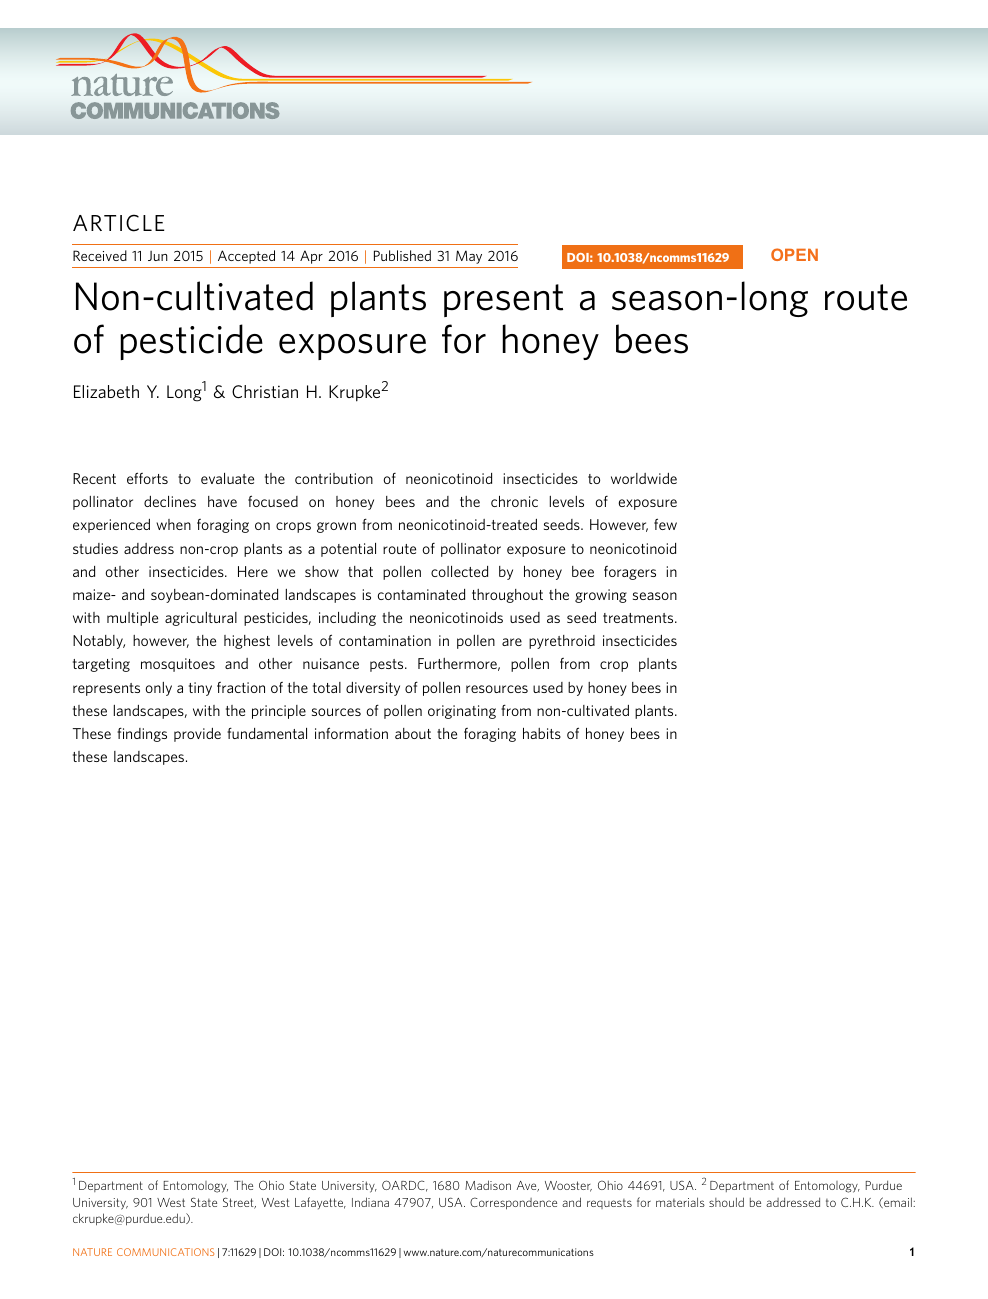 Non Cultivated Plants Present A Season Long Route Of Pesticide Exposure For Honey Bees Topic Of Research Paper In Biological Sciences Download Scholarly Article Pdf And Read For Free On Cyberleninka Open Science